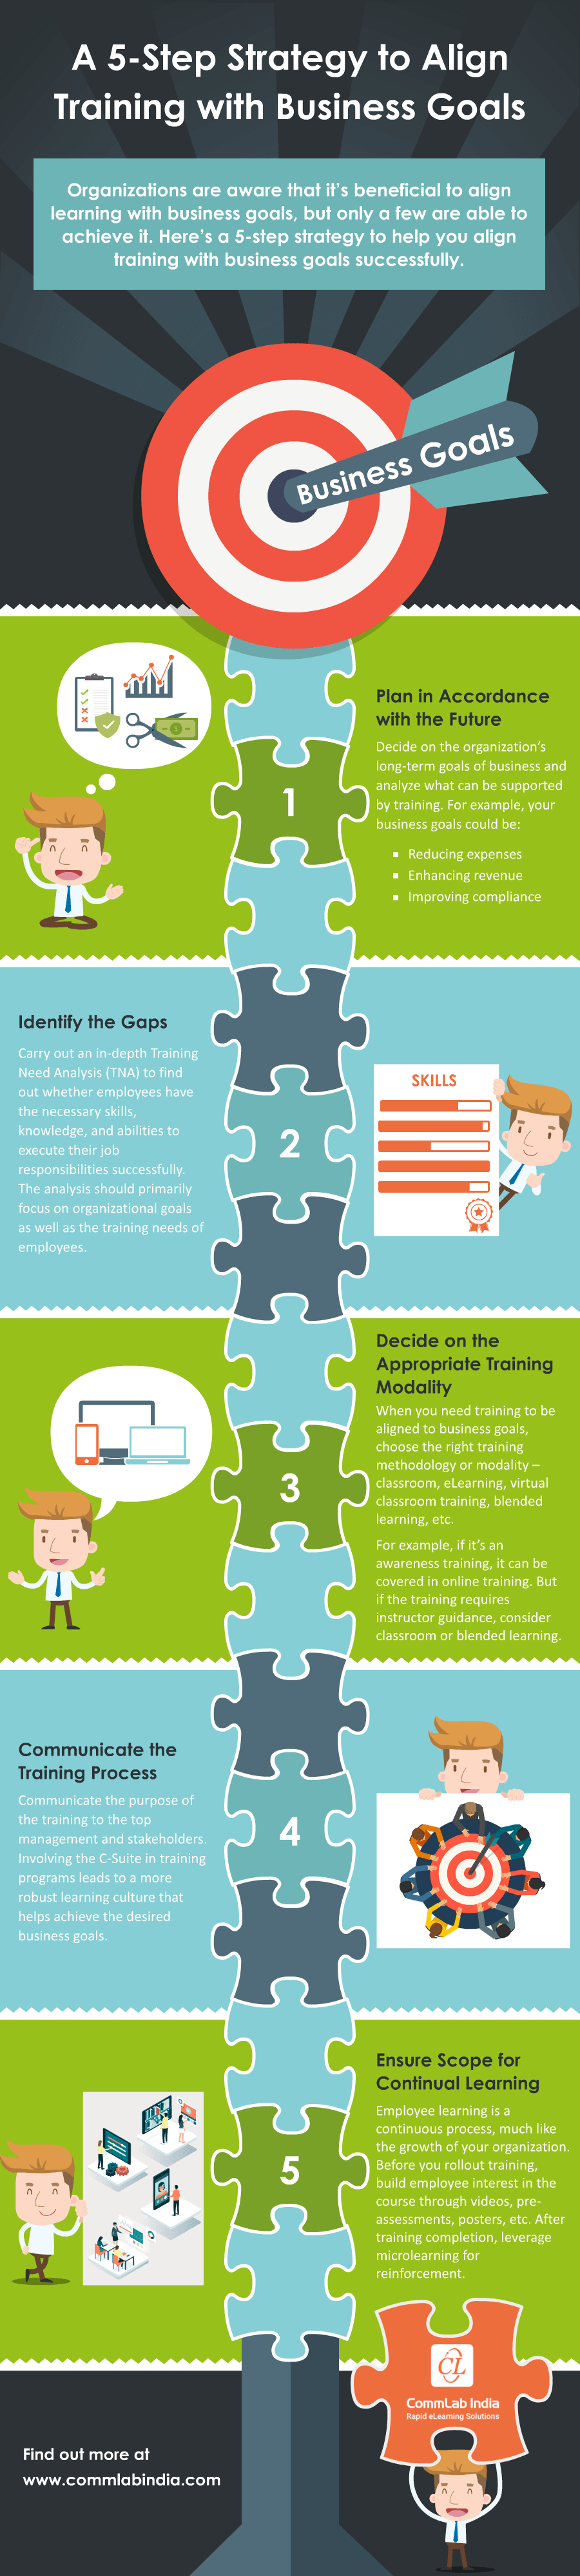 A 5-Step Strategy To Align Training With Business Goals